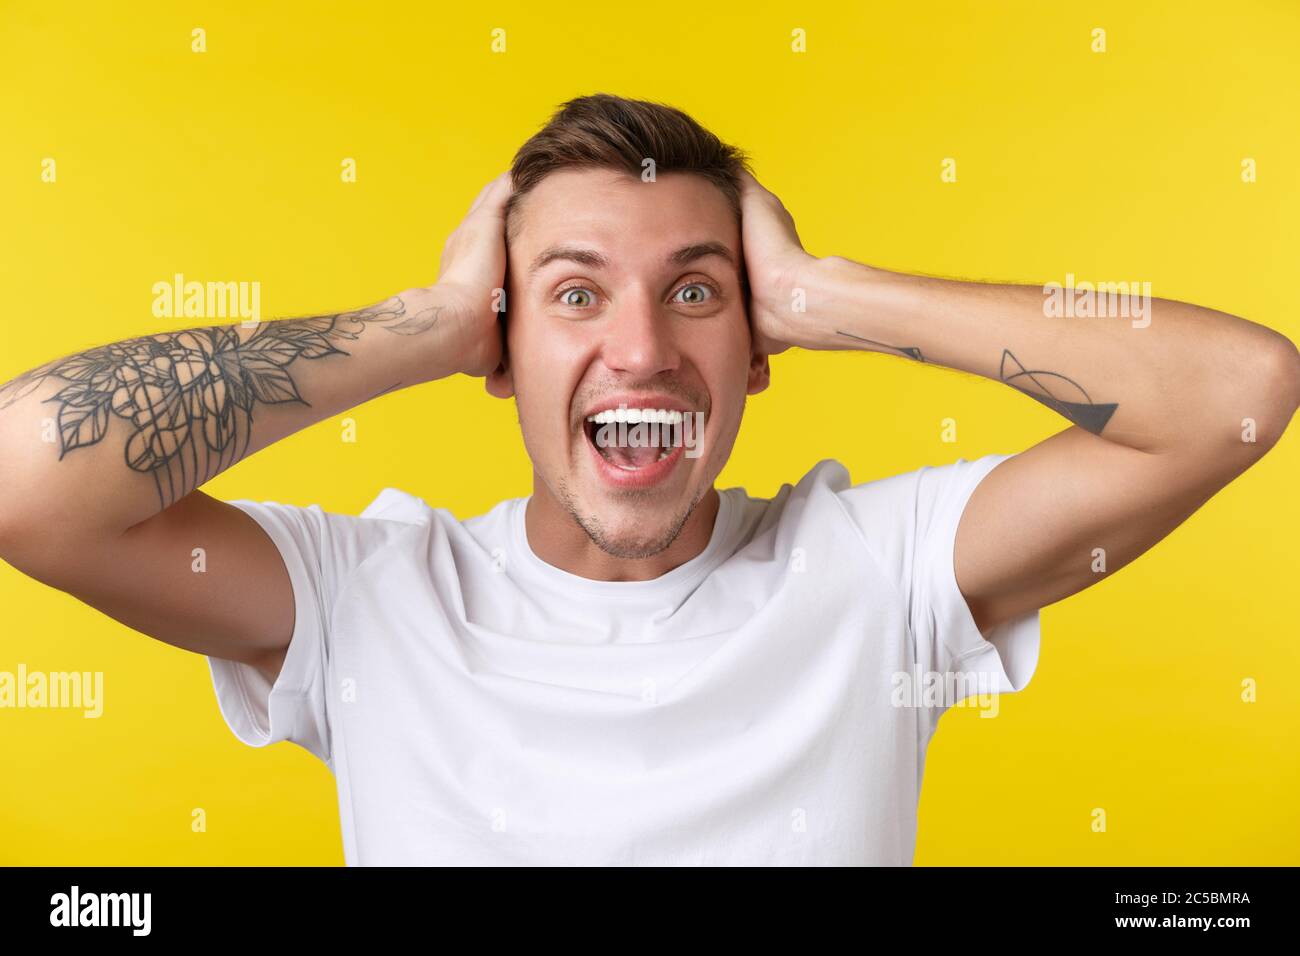 Lifestyle, summer and people emotions concept. Close-up portrait of extremely happy rejoicing young man looking surprised, cant believe he won prize Stock Photo